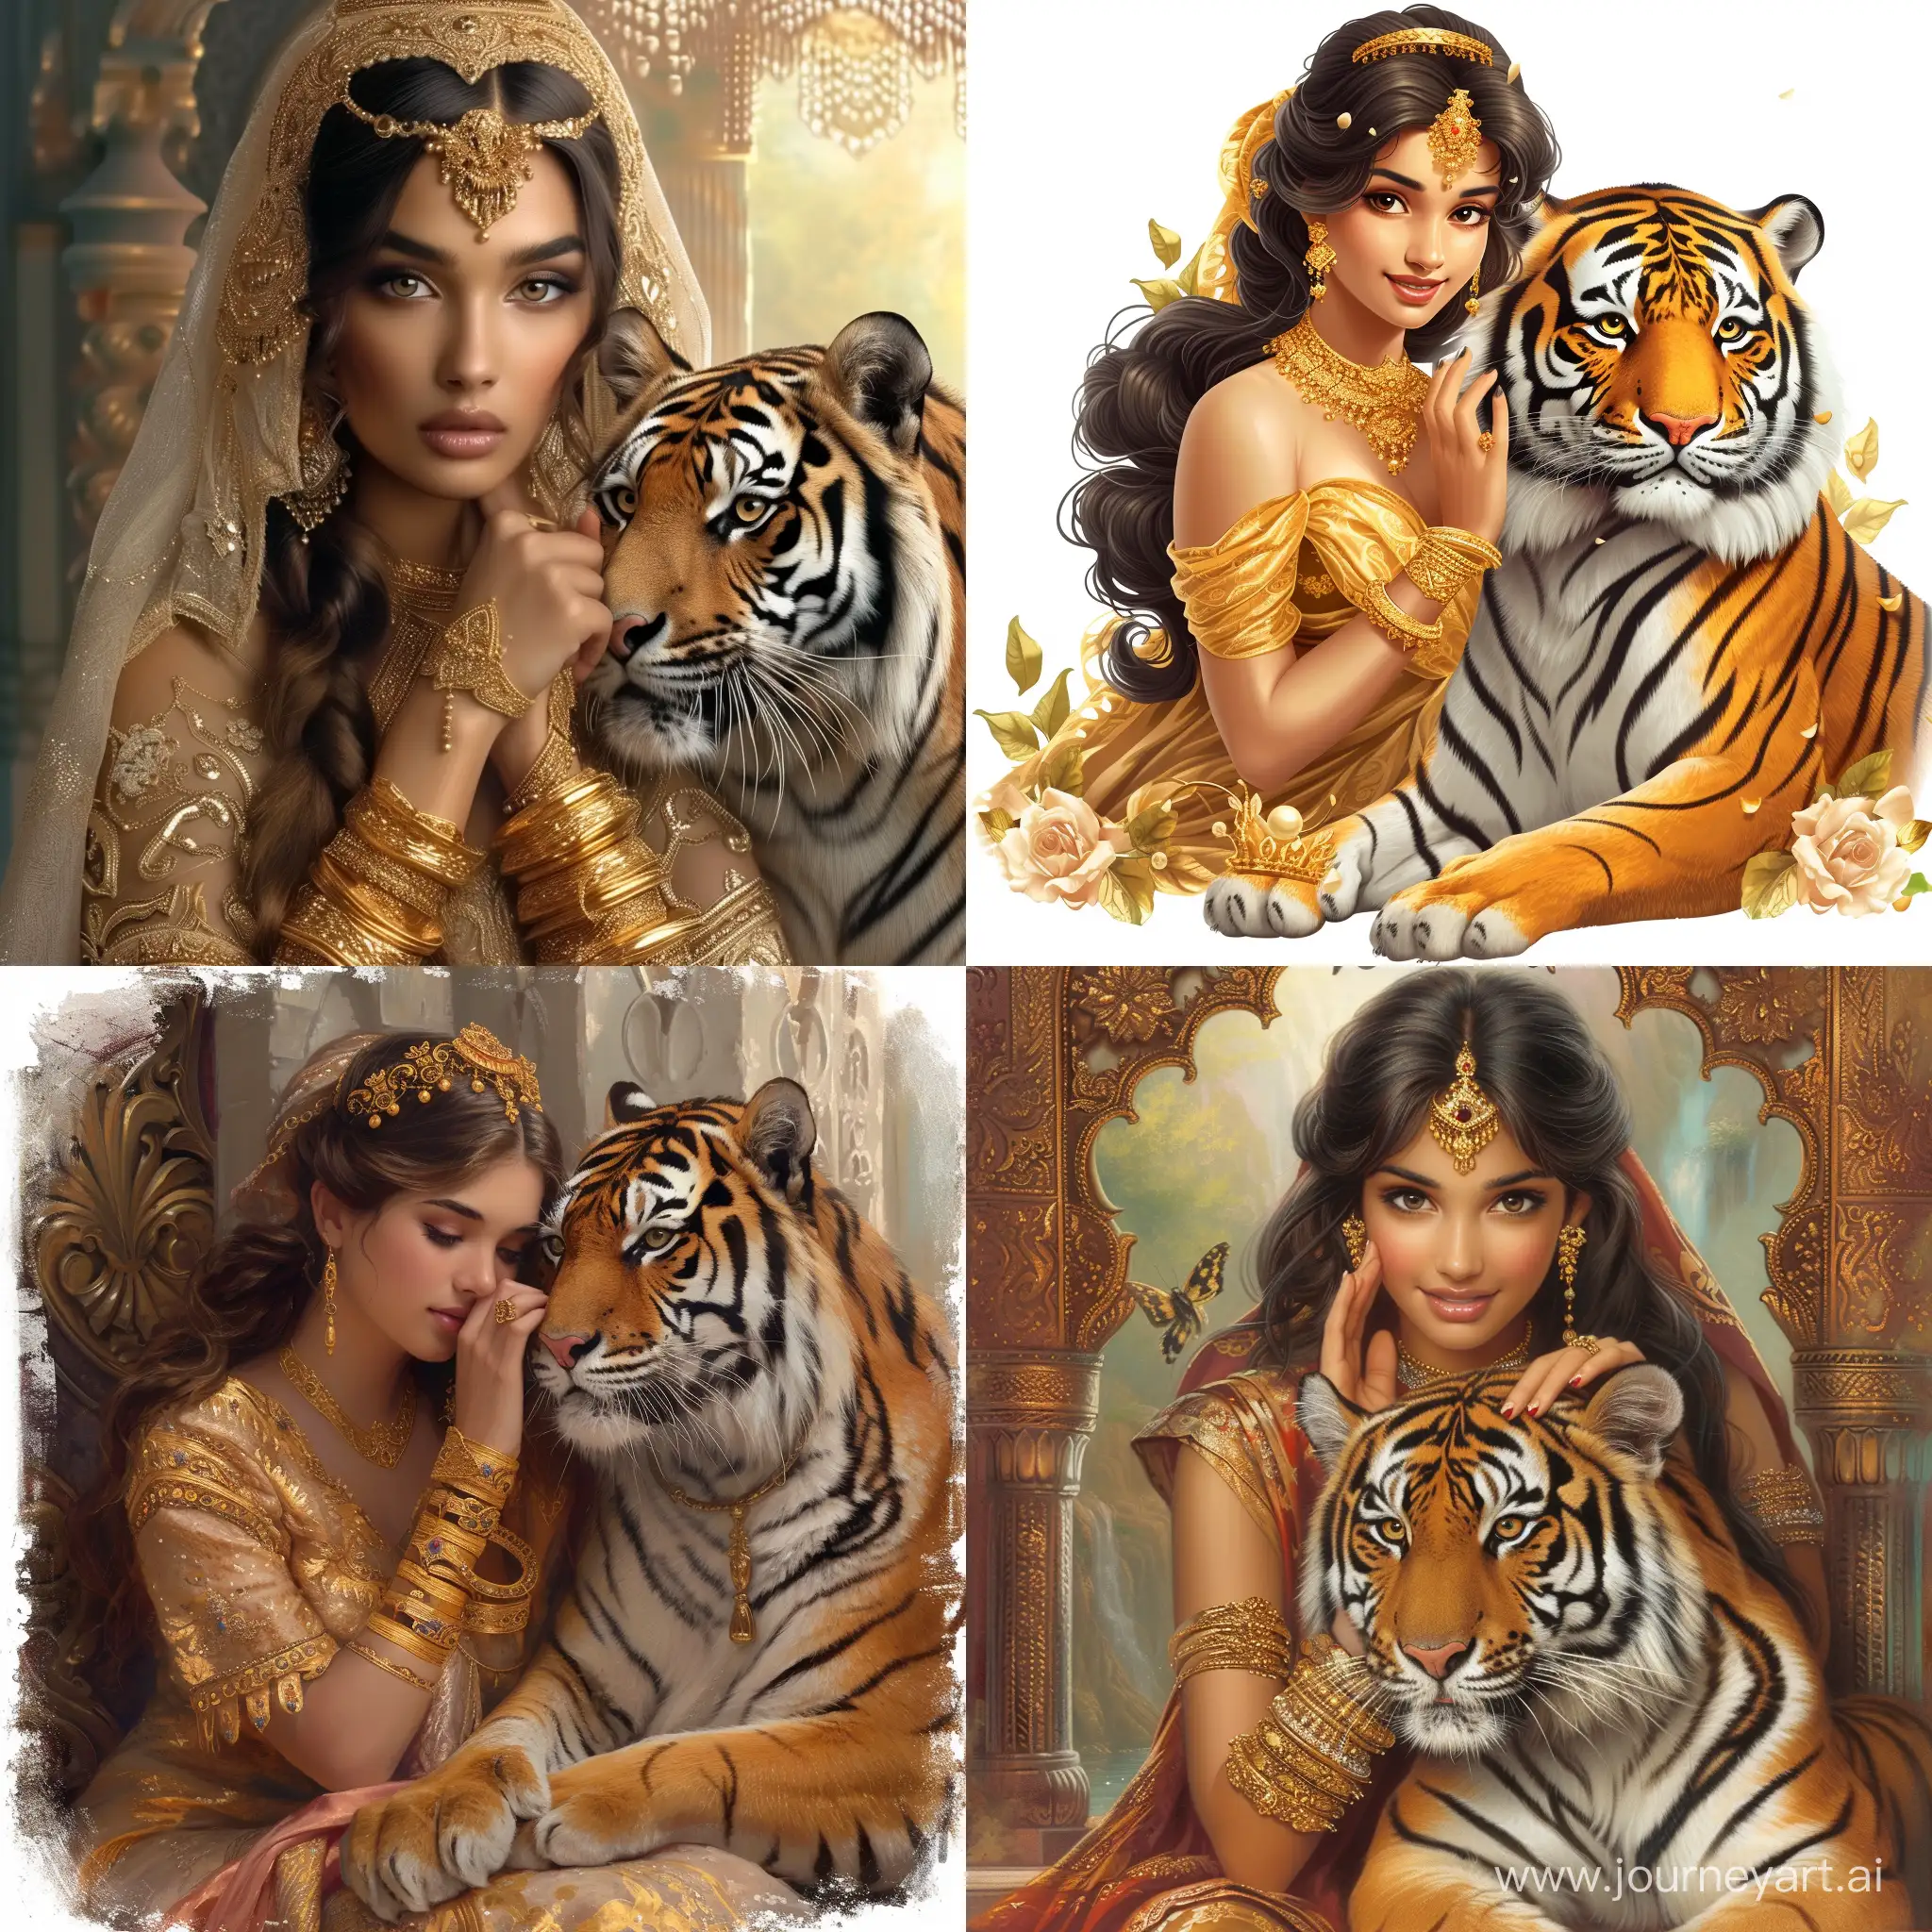 Regal-Princess-with-Golden-Accessories-and-Majestic-Tiger